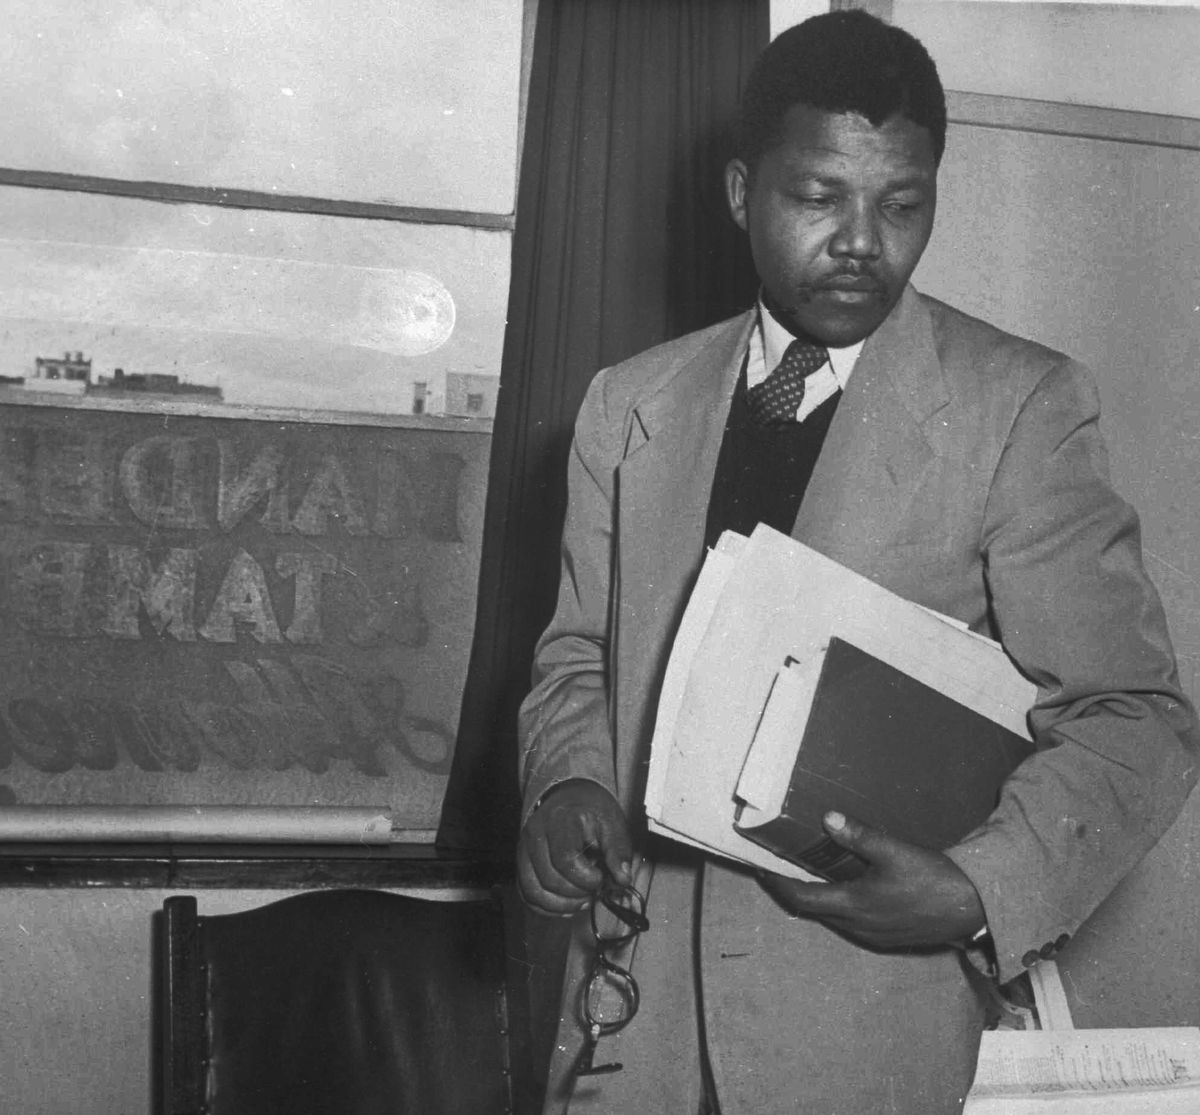 FILE- This is a 1952 file photo of ANC leader Nelson Mandela in the law office he opened with his colleague, Oliver Tambo. This was the first black legal practice in Johannesburg, South Africa. The names Mandela and Tambo can be seen written across the window pane. Nelson Mandela and his African National Congress are expected to be propelled into power when the final ballot is counted in South Africa